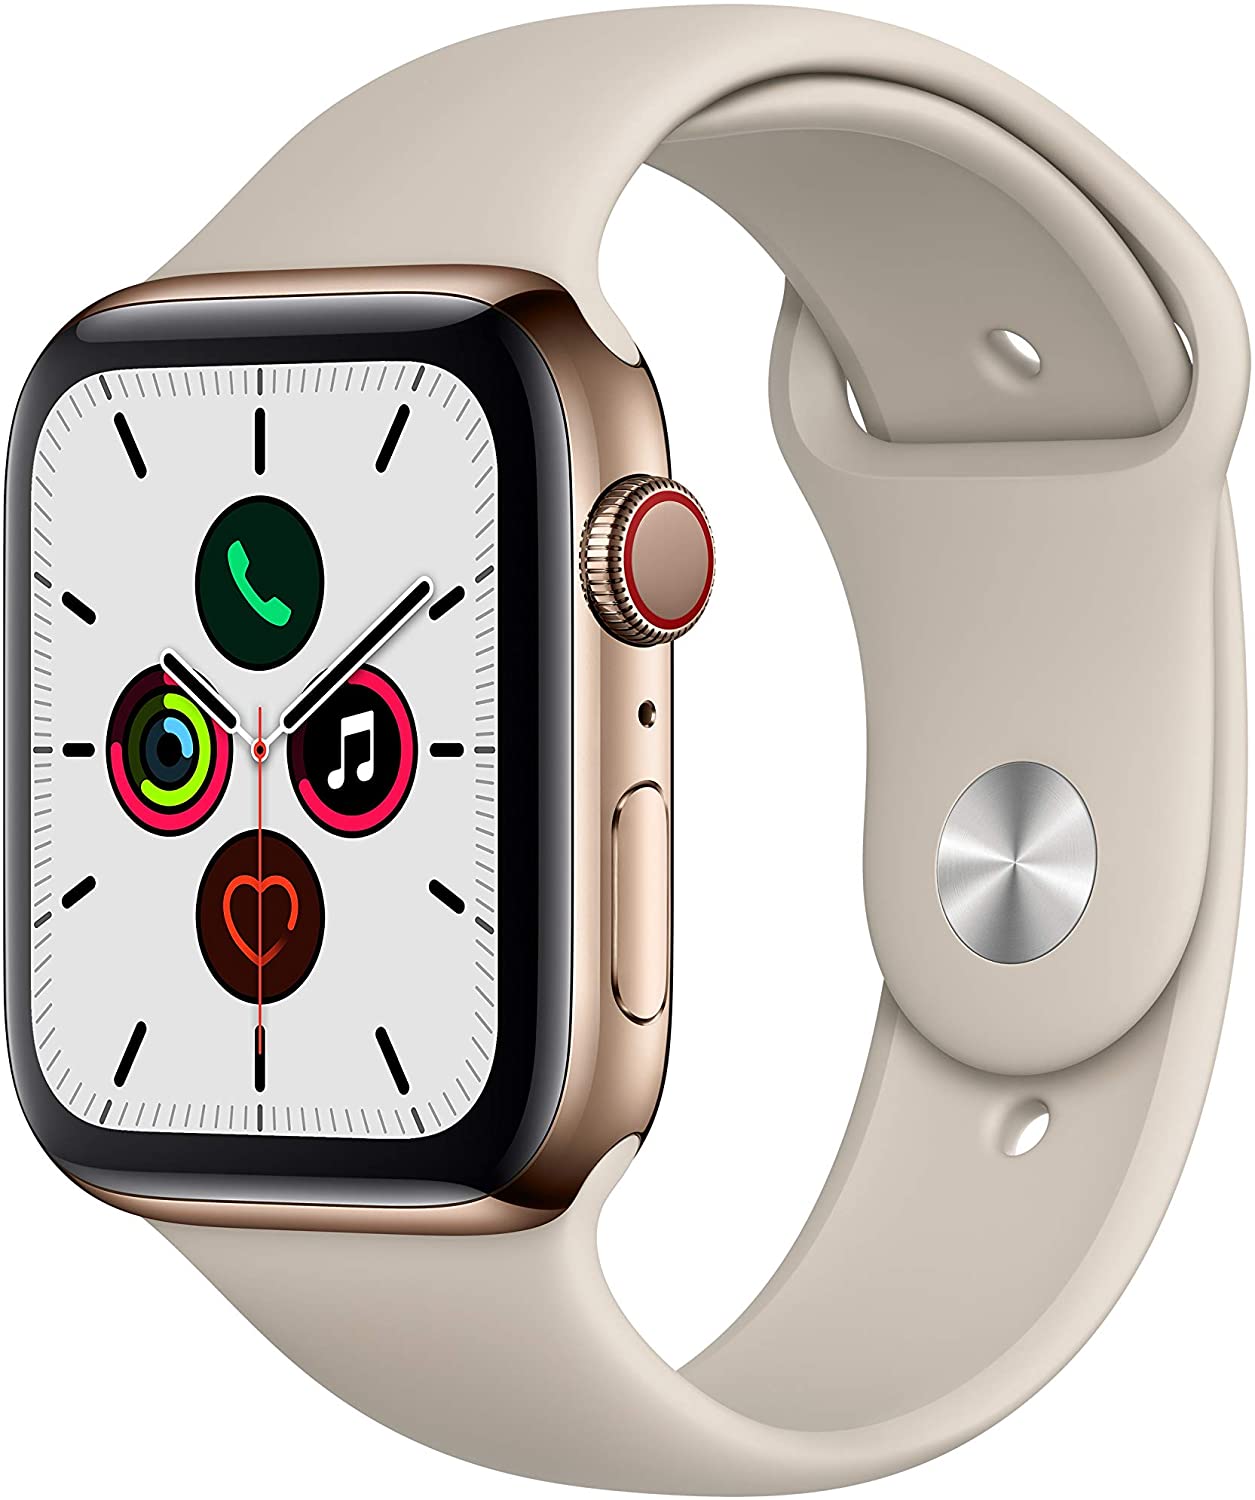 Apple Watch Series 5 Stainless Steel Gold Stone